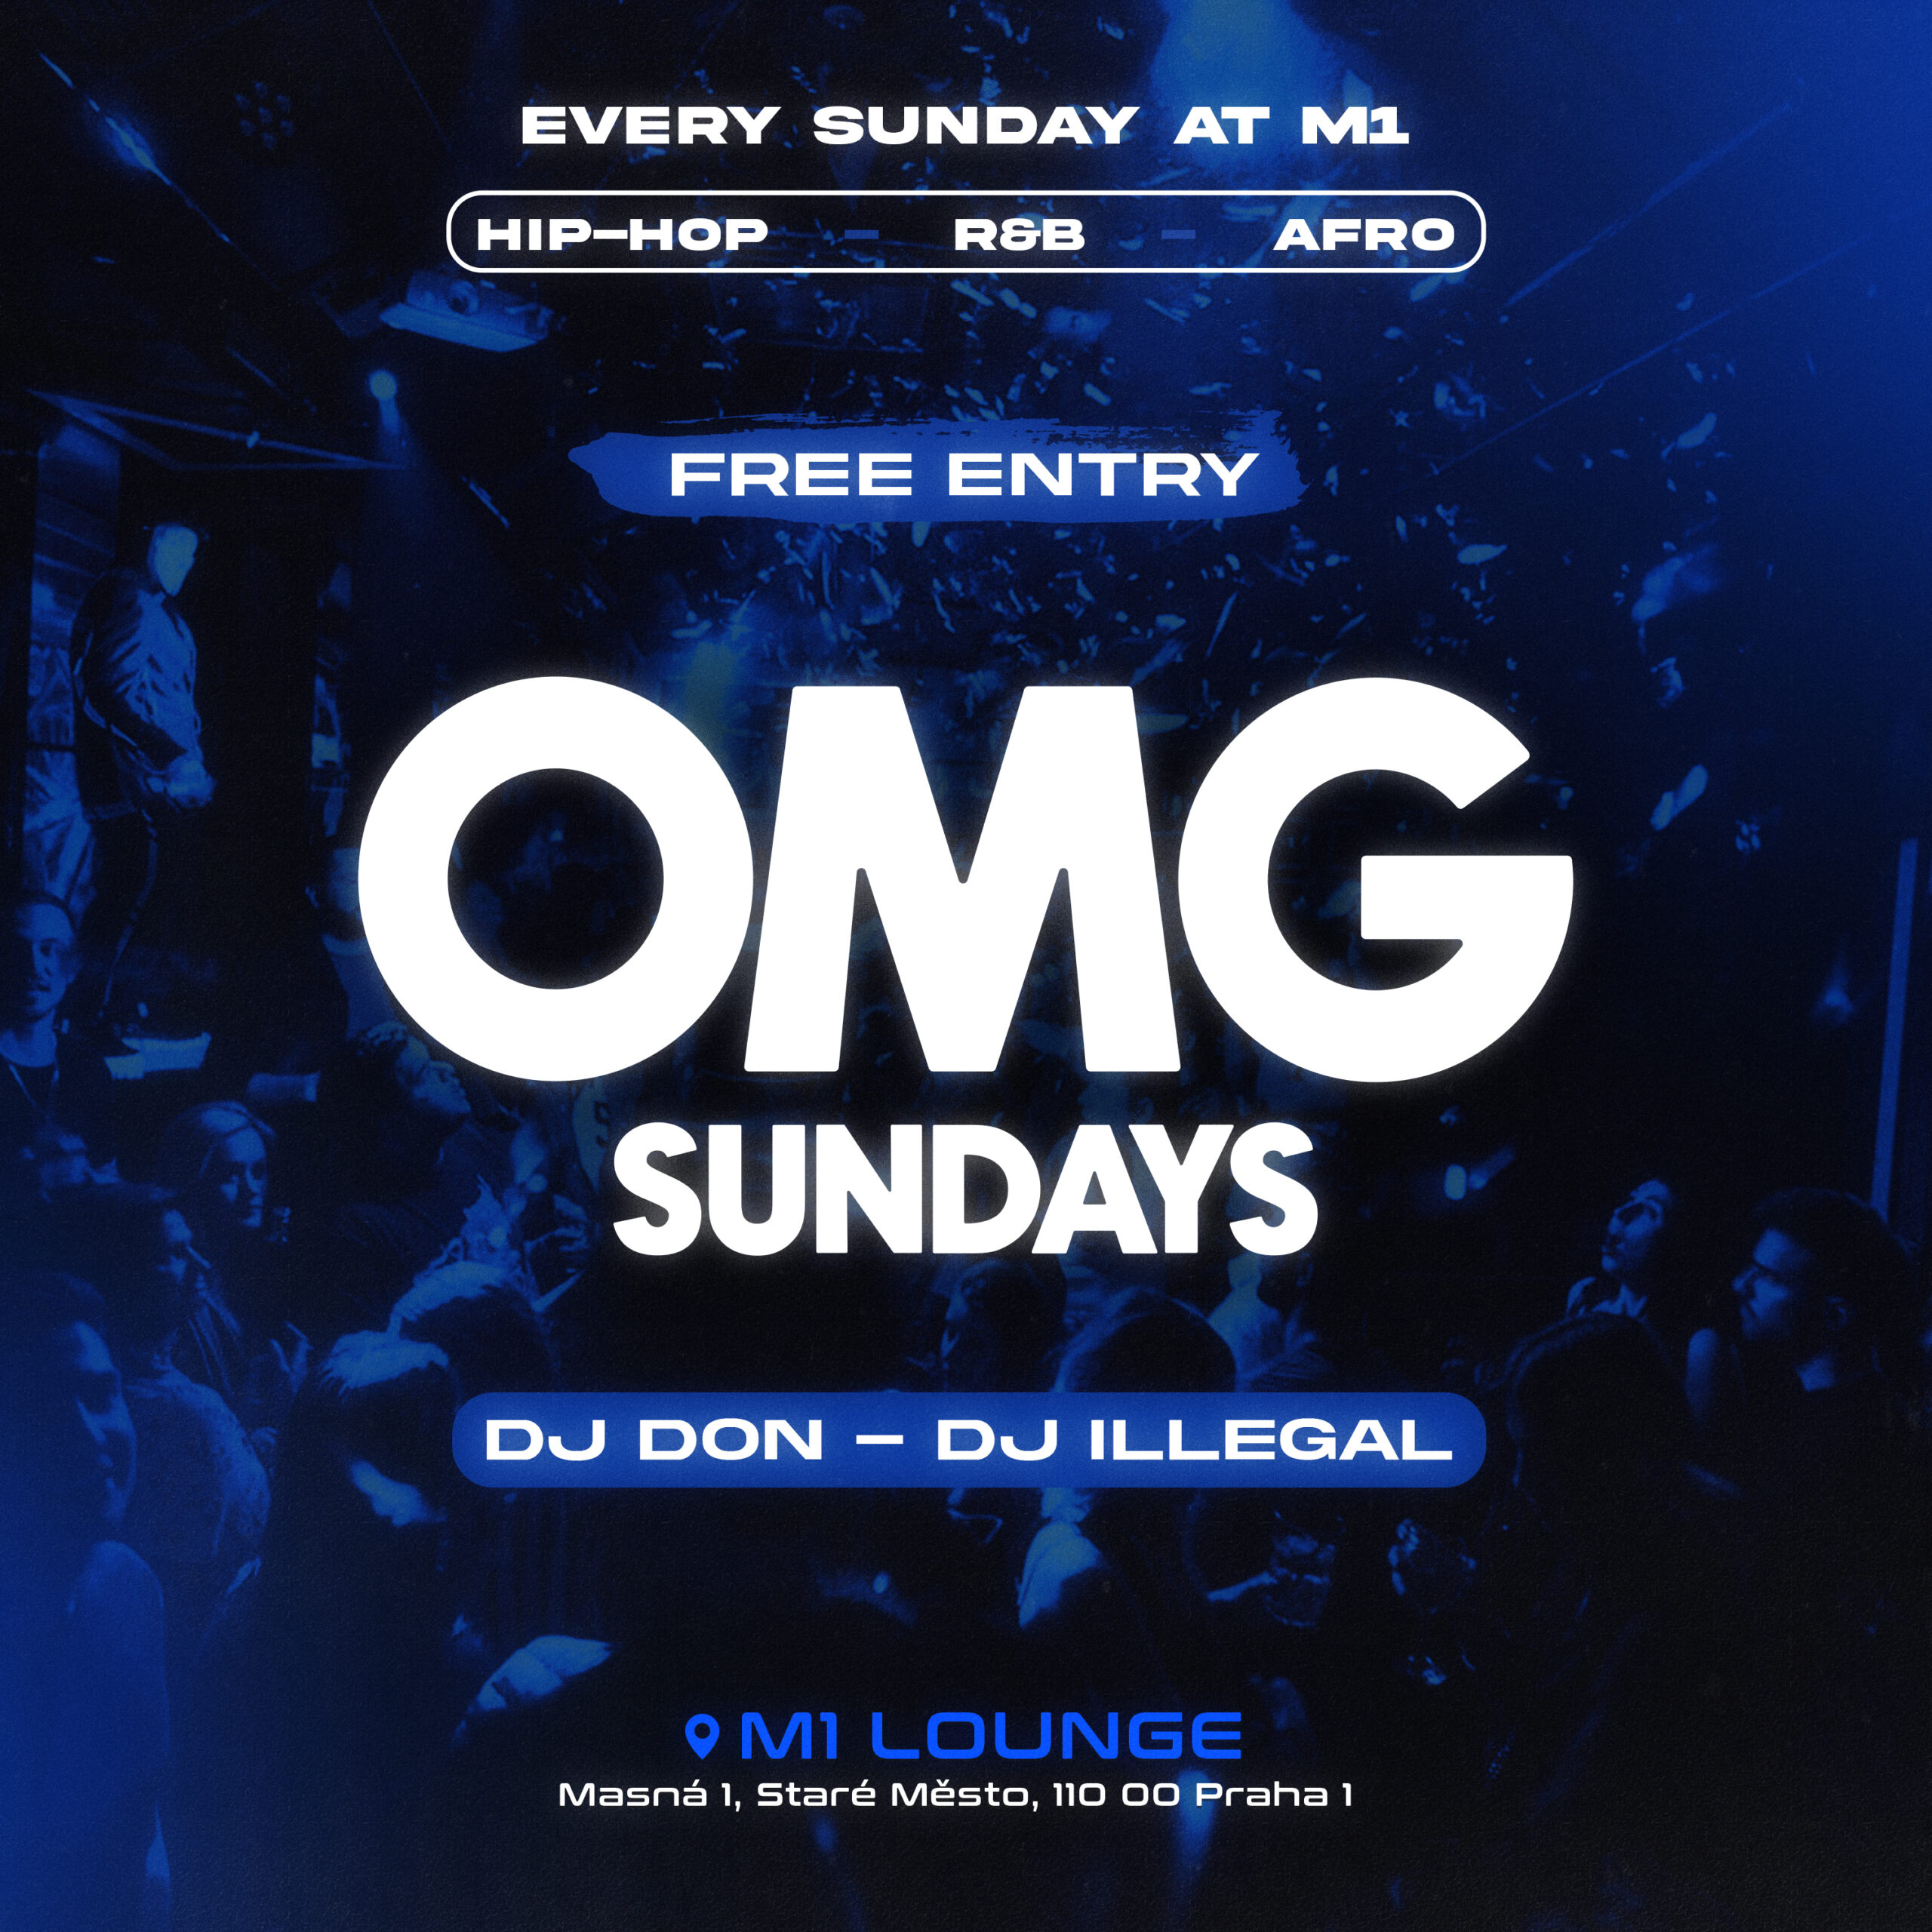 OMG Sunday - The best Suday Party in Town in MOON CLUB!